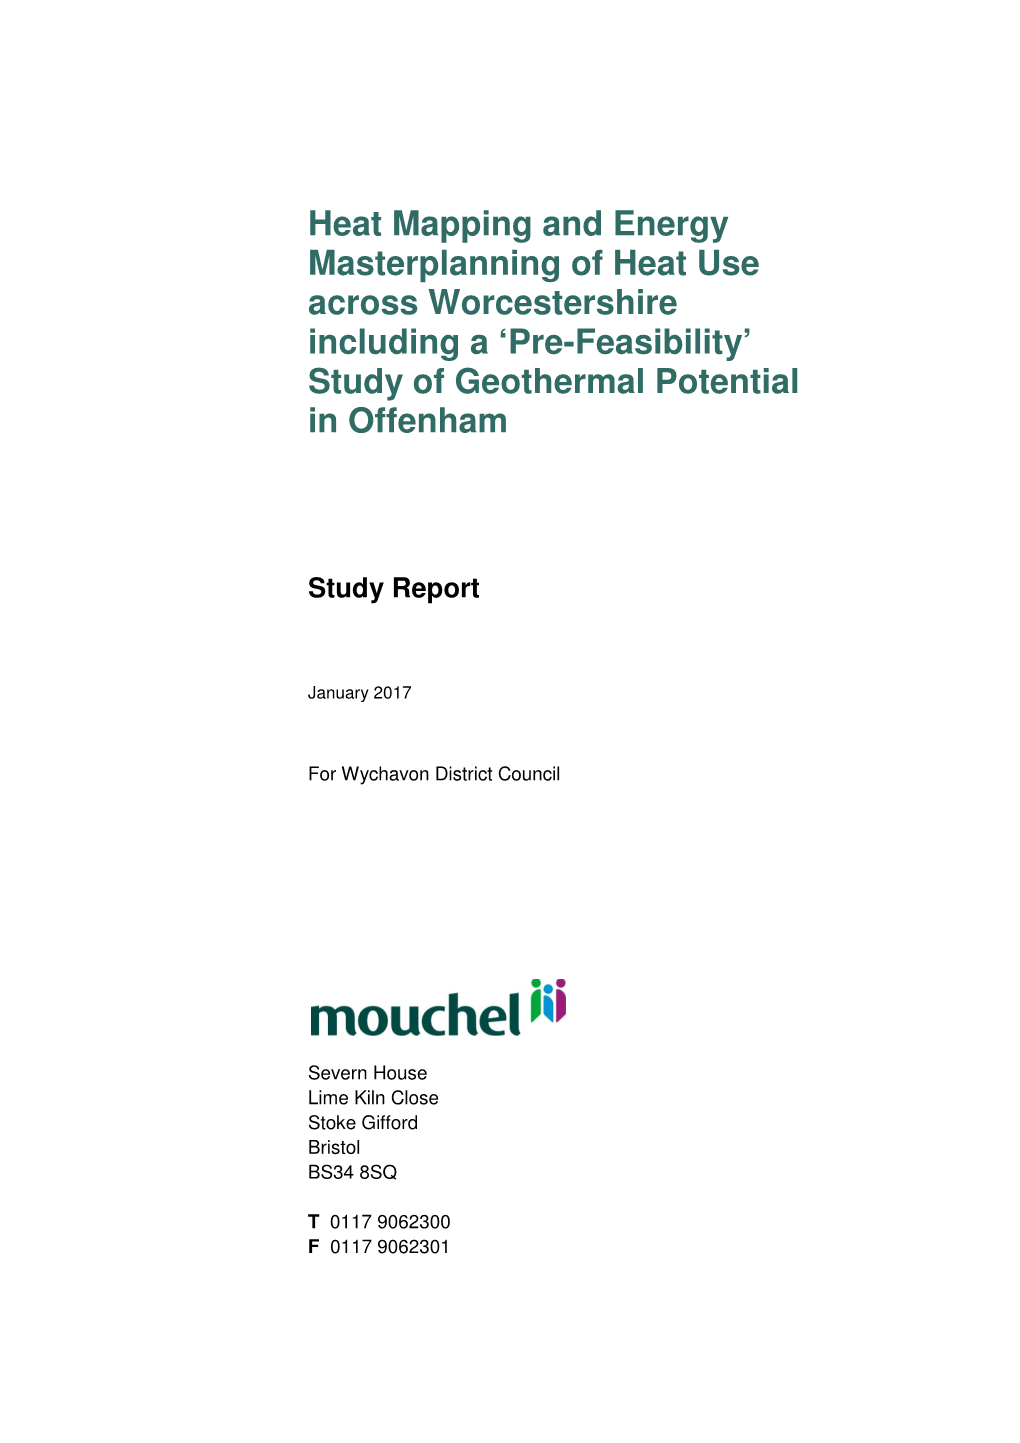 Heat Mapping and Energy Masterplanning of Heat Use Across Worcestershire Including a ‘Pre-Feasibility’ Study of Geothermal Potential in Offenham